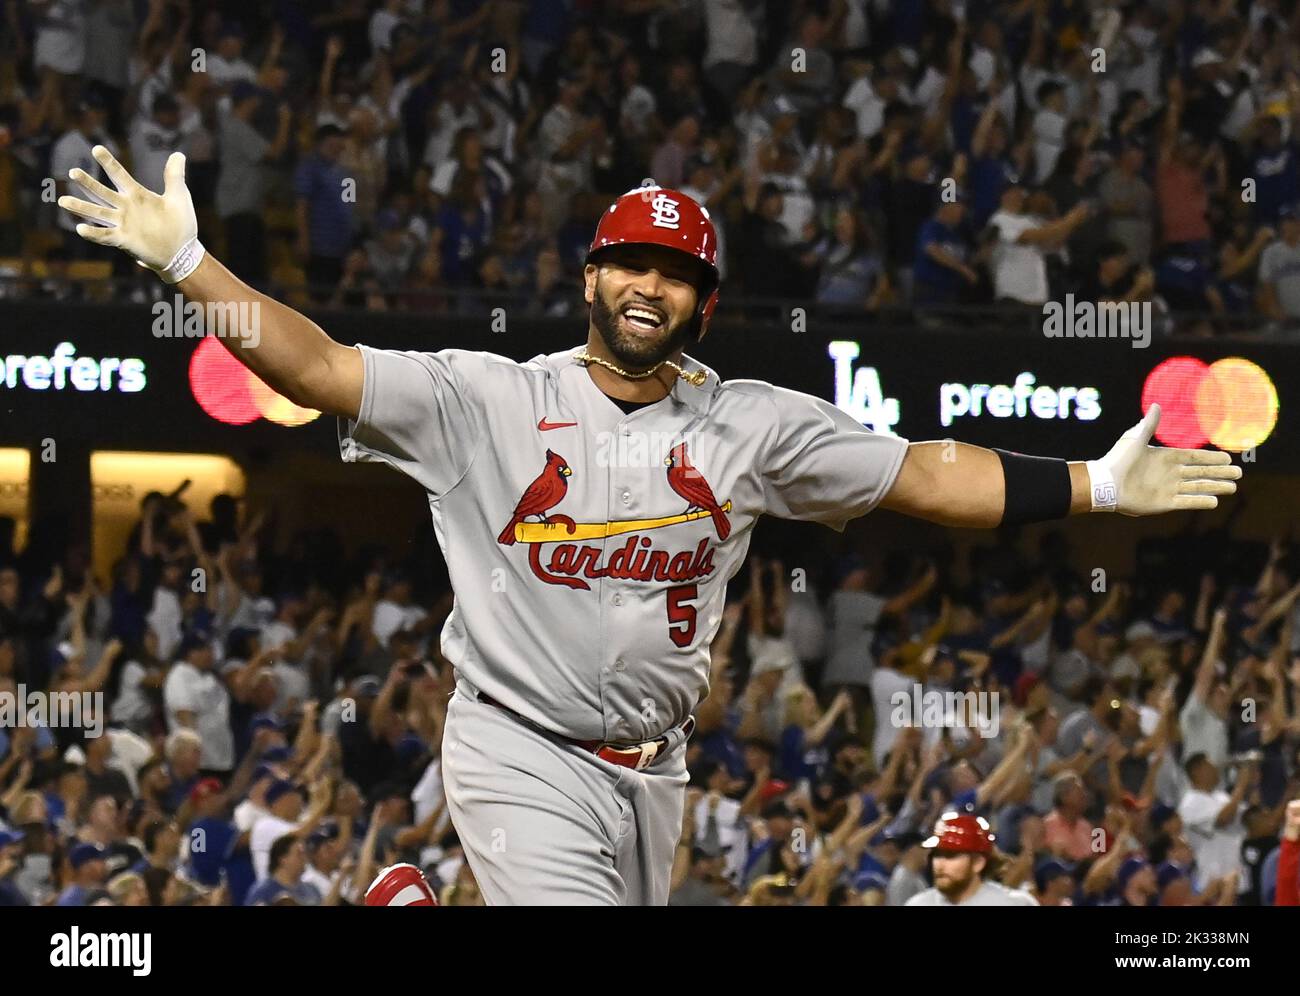 Los Angeles, United States. 23rd Sep, 2022. St. Louis Cardinals slugger Albert Pujols celebrates after hitting his 700th career home run in the fourth inning against the Los Angeles Dodgers at Dodger Stadium in Los Angeles on Friday, September 23, 2022. Photo by Jim Ruymen/UPI Credit: UPI/Alamy Live News Stock Photo